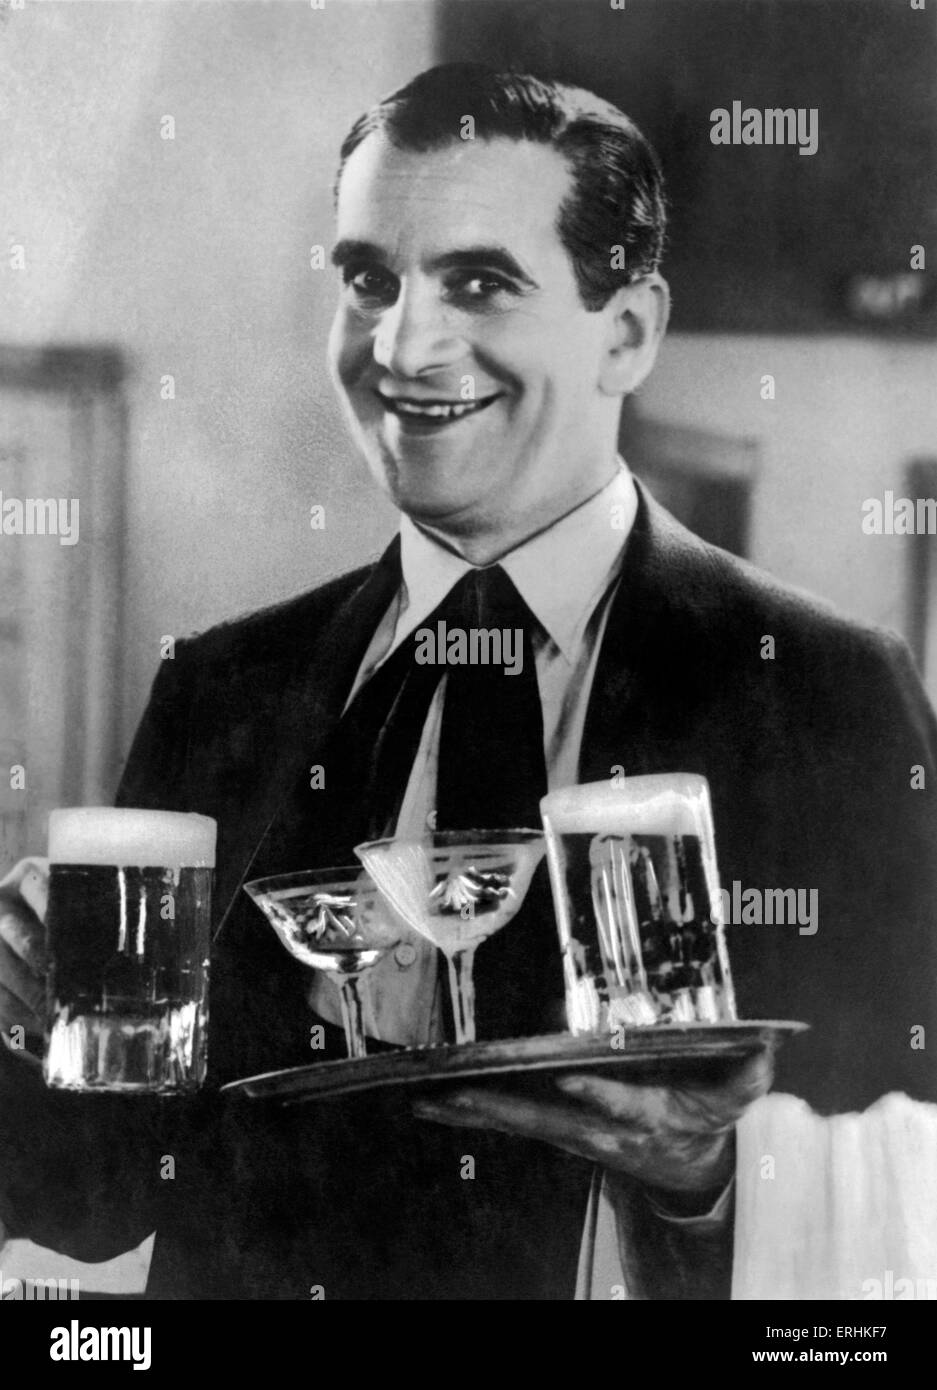 Al Jolson, American singer and actor, carrying a tray of drinks.  Film still. 26 May 1886 - 23 October 1950. Stock Photo